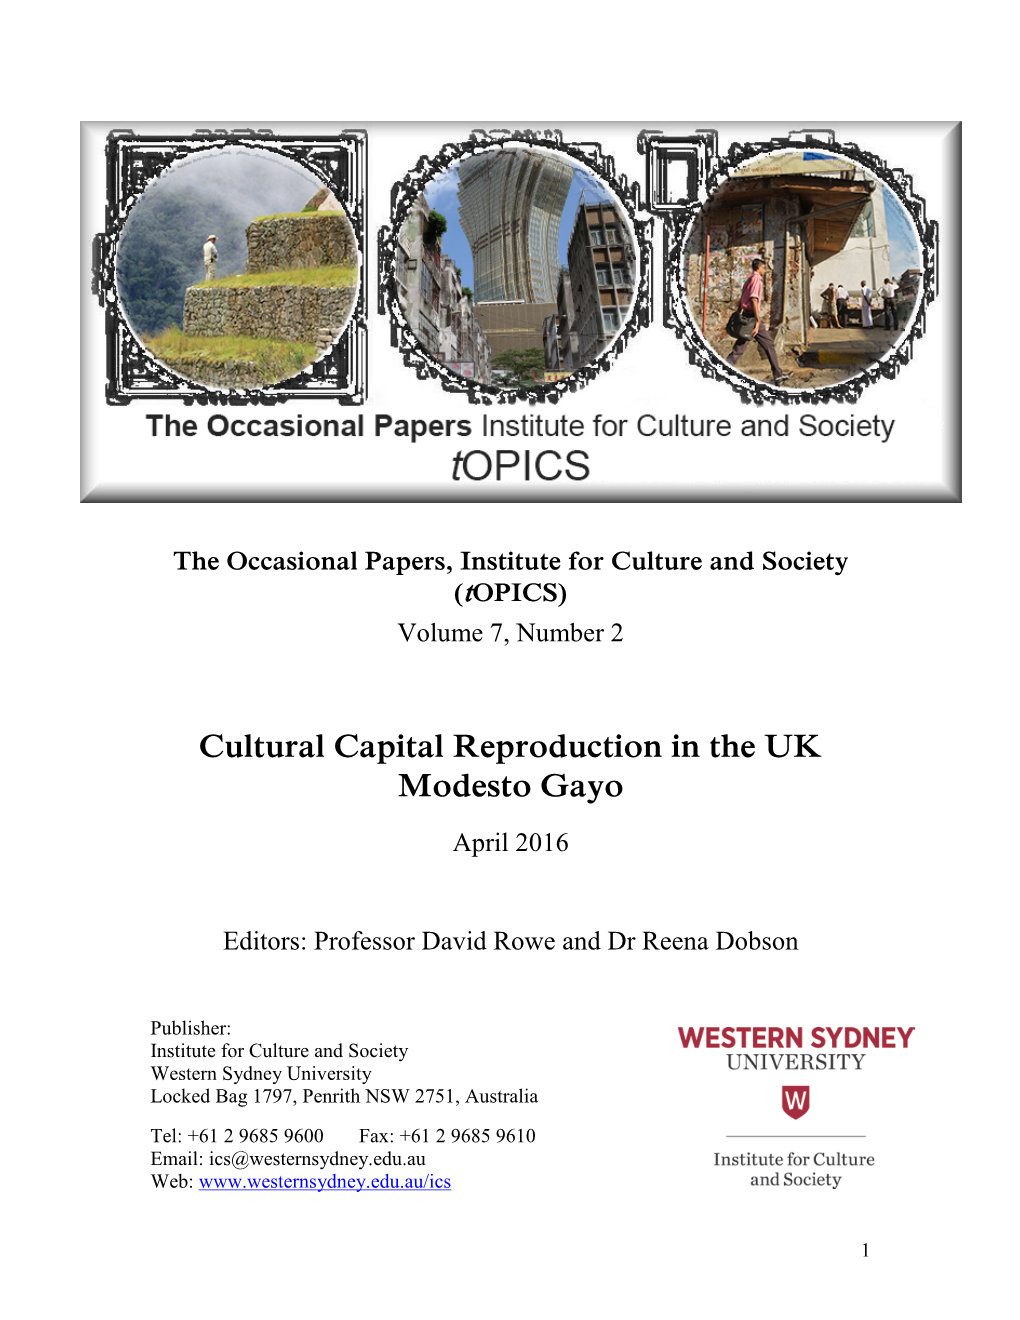 Cultural Capital Reproduction in the UK Modesto Gayo